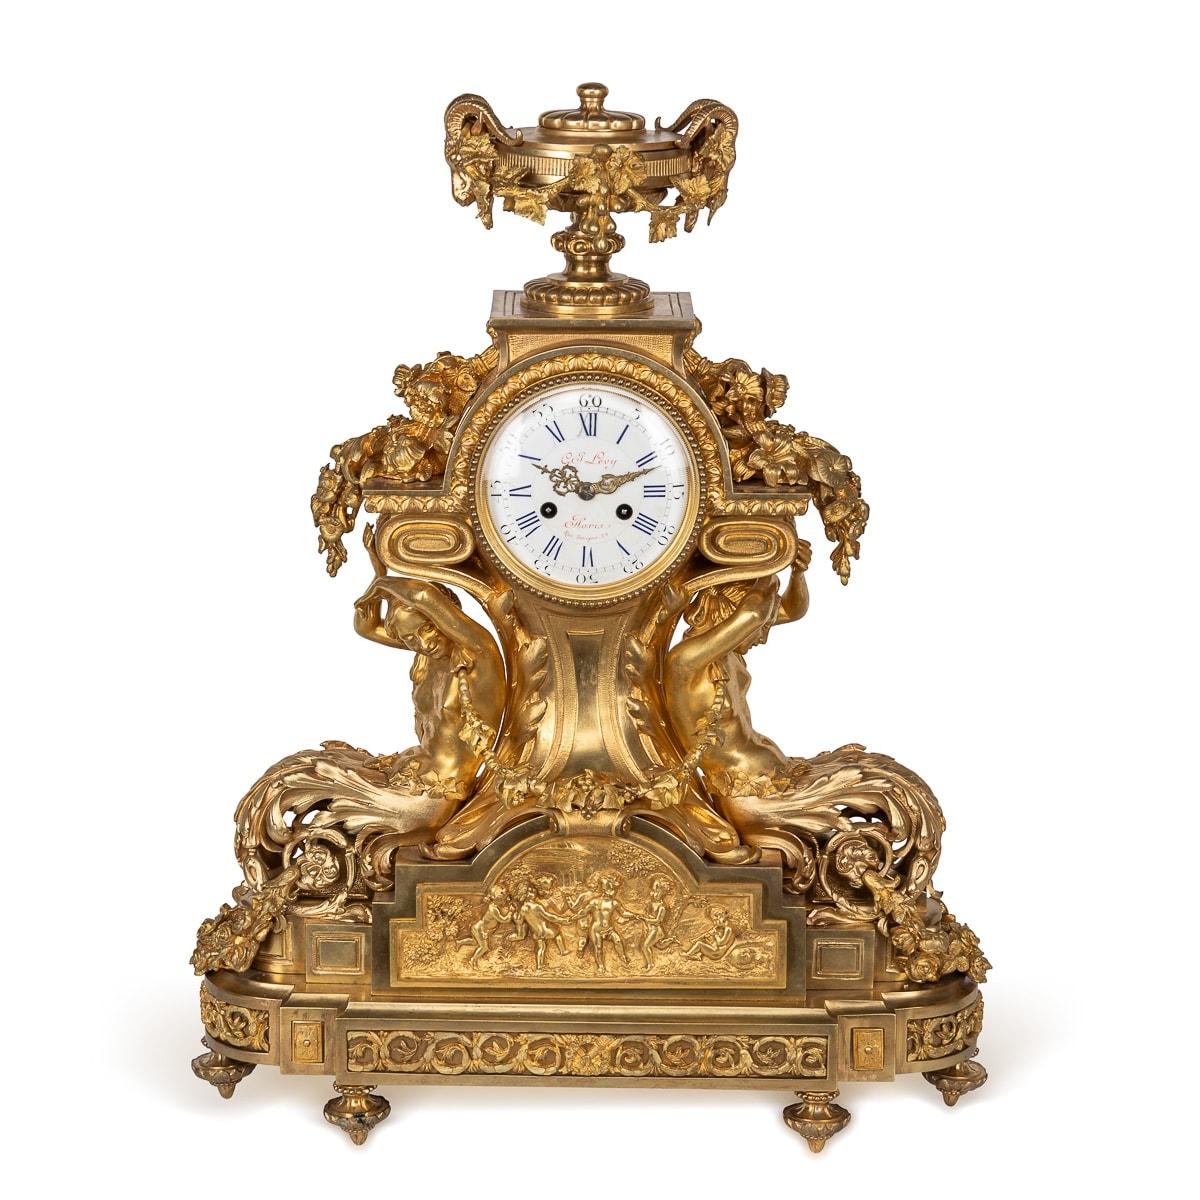 Antique 19th Century French garniture, cast bronze in ormolu, a striking ensemble featuring a pair of seven-light candelabras and a mantel clock. The clock is adorned with foliage and crowned with two regal ram heads, with the signature prominently